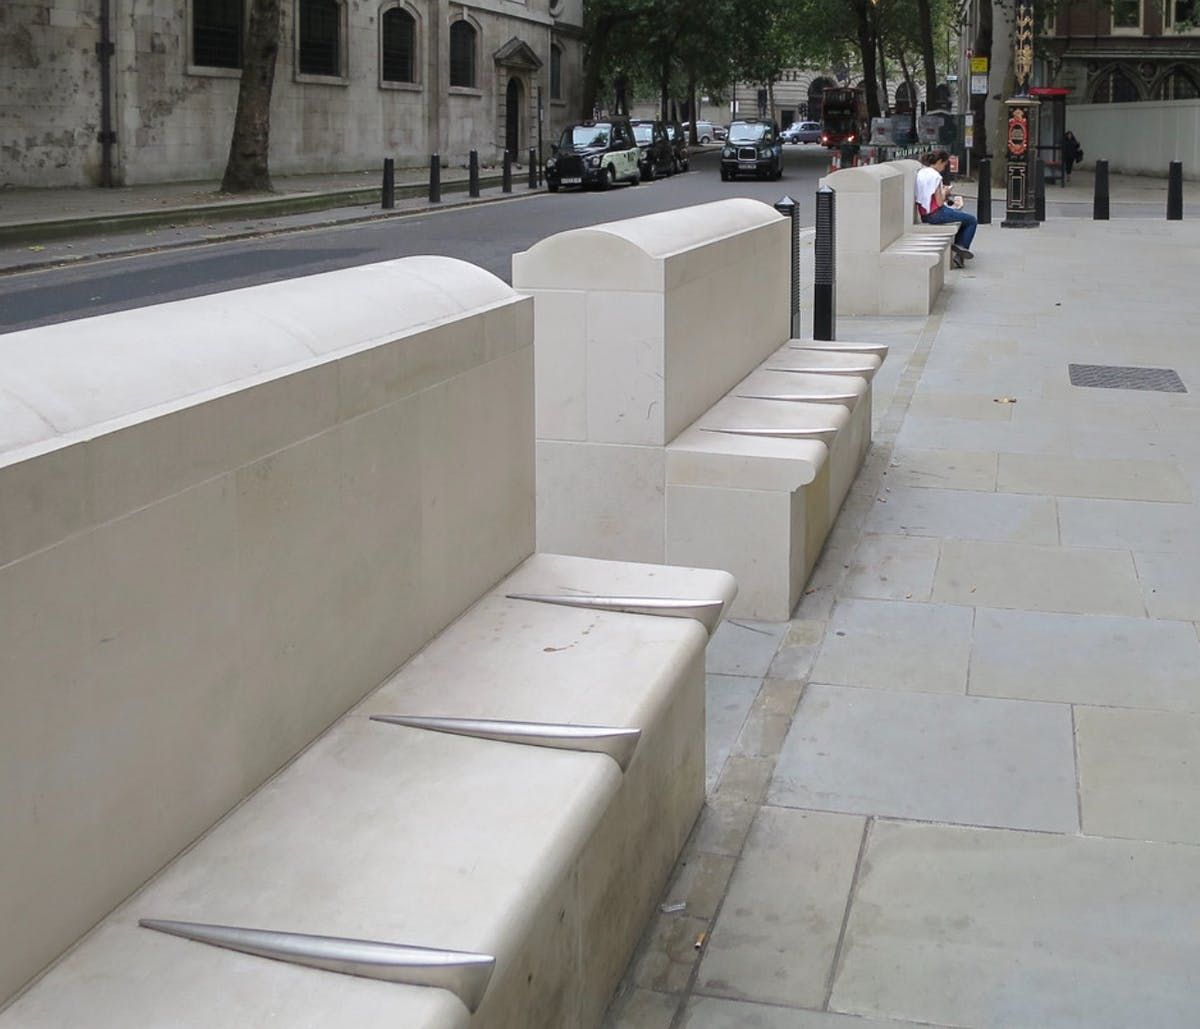 Hostile Architecture is making more and more people uncomfortable #HostileArchitecture #PublicSpace

arcnct.co/3n8jhzO